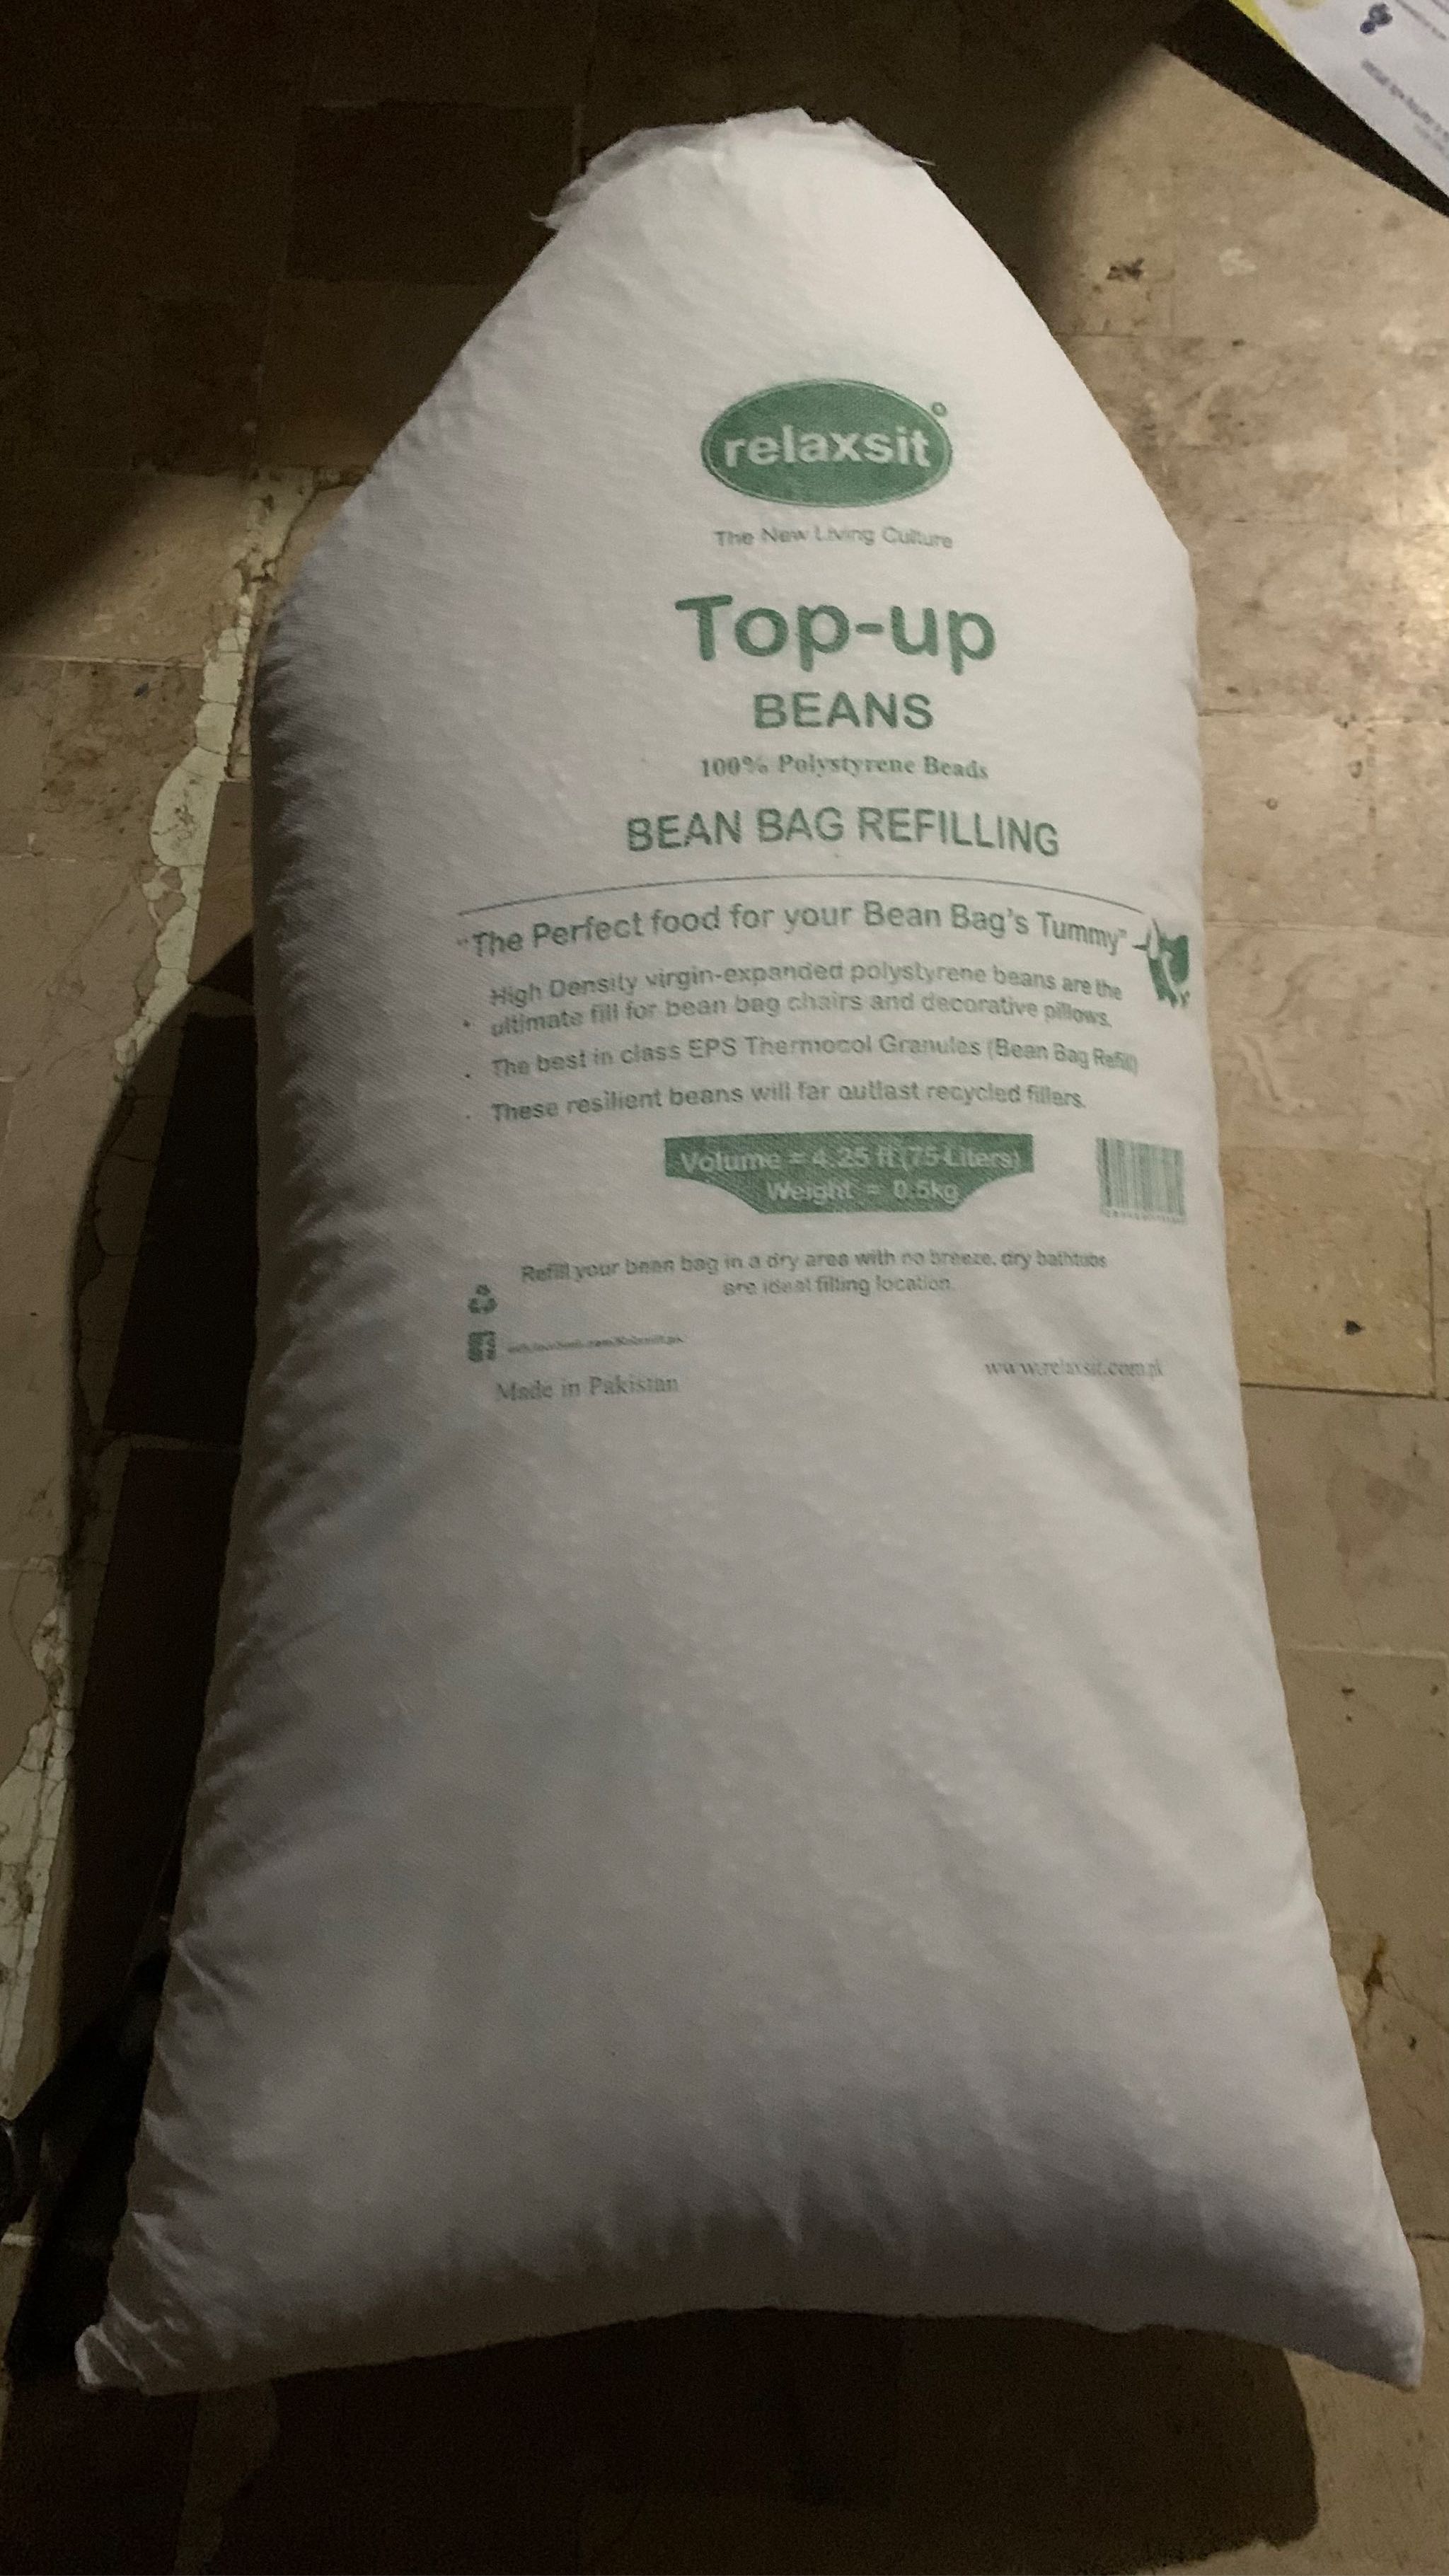 Relaxsit bean bag refill Premium Quality Polystyrene Beads for BeanBag  Refilling beans bag top-up Available in 0.5, 1, 2, and 4kg Packets